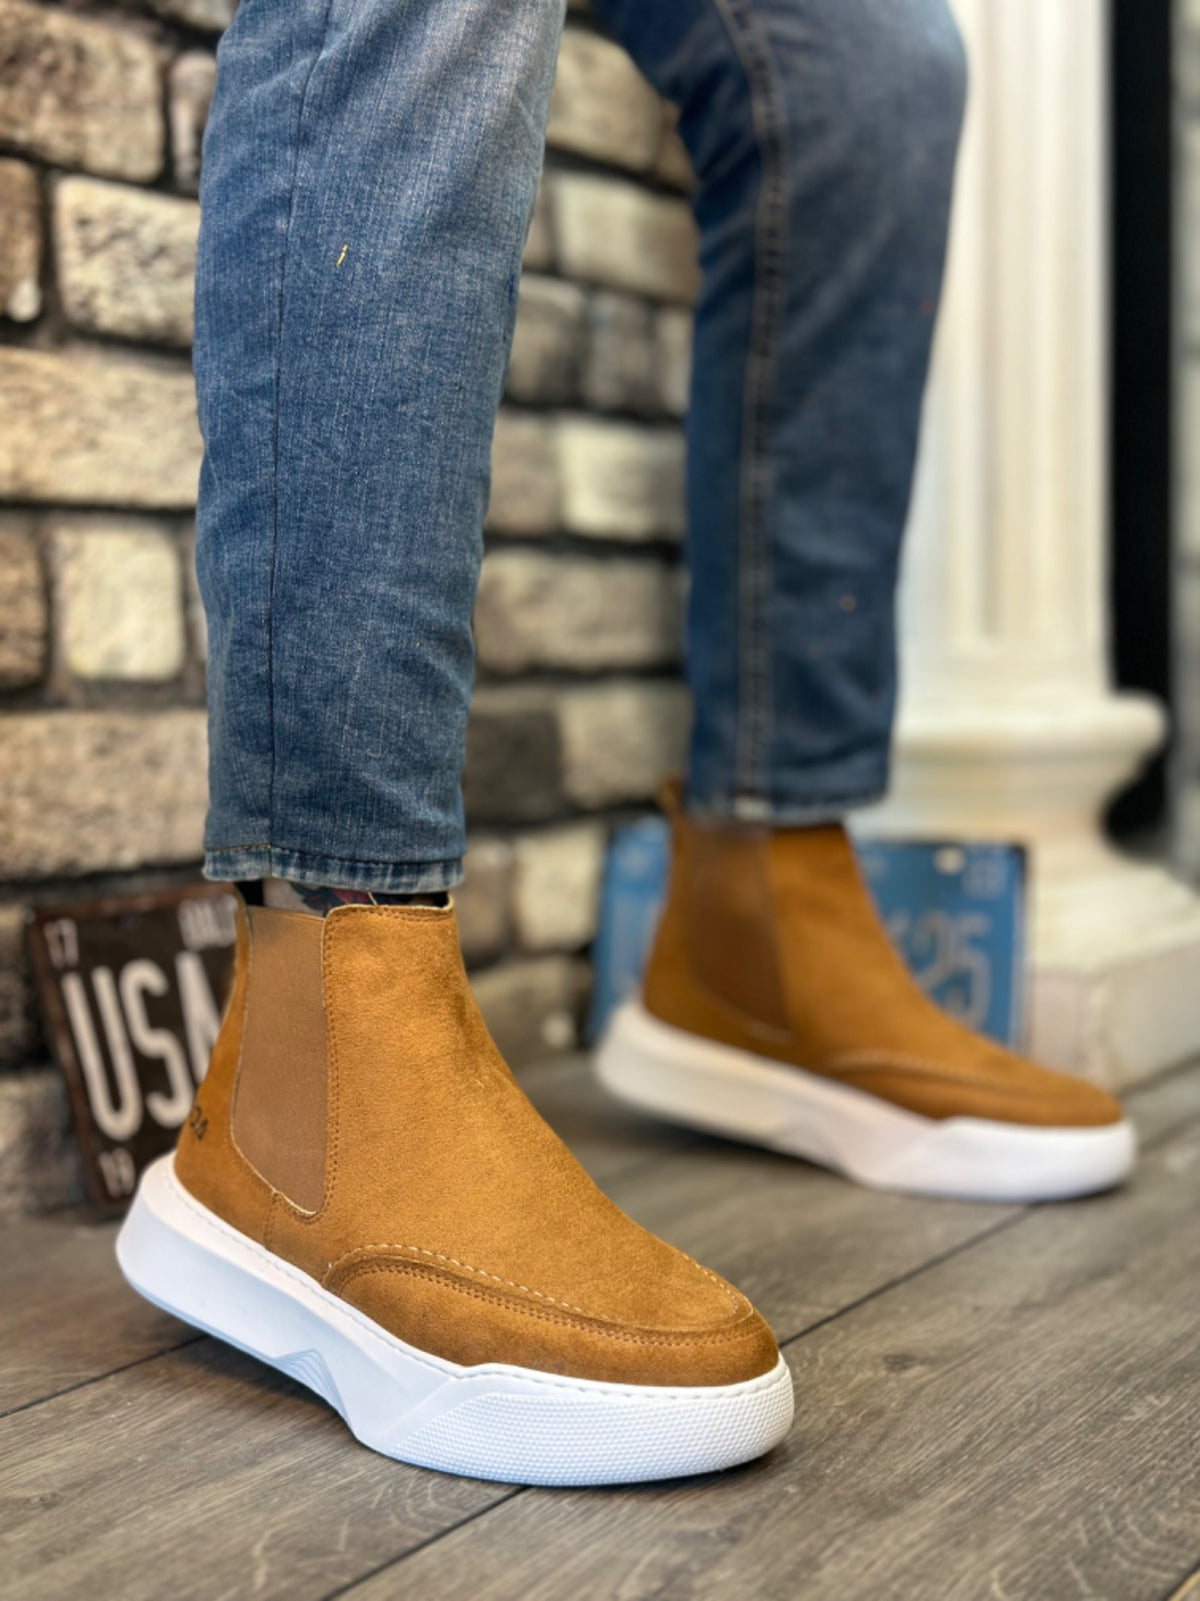 BA0150 Laceless Men's Tan Suede White High Sole Sports Boots - STREETMODE™